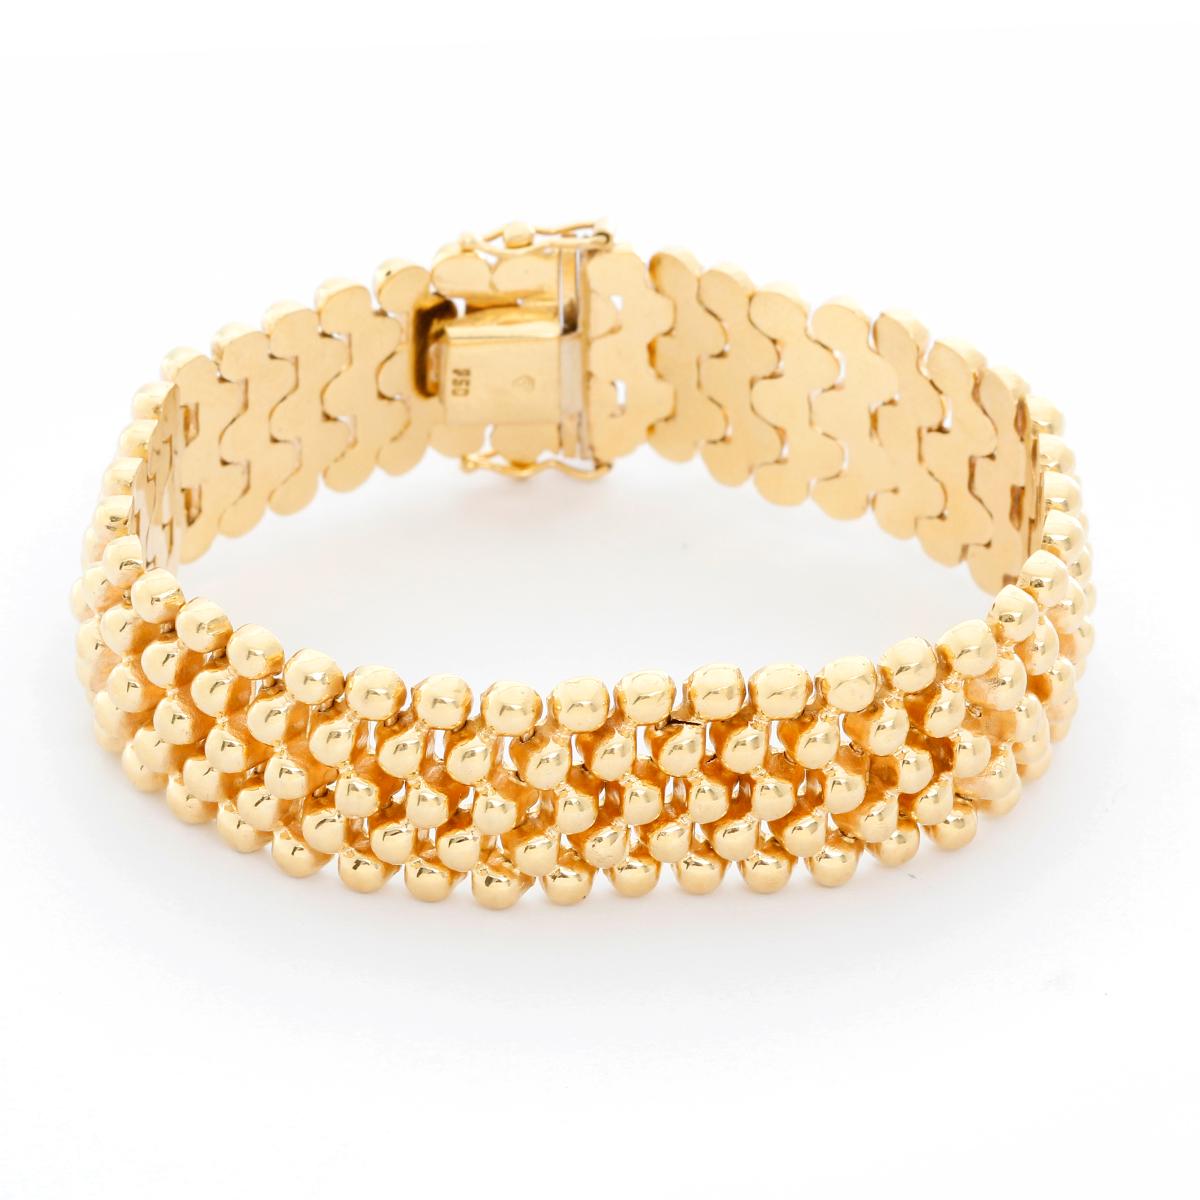 5 Strands Gold Bead Bracelet  - This bracelet features 5 strands of 18K yellow gold beads. Weighs 34.30 grams and is 6.35 inches and 5/8 inch wide. Pre-Owned with box. .